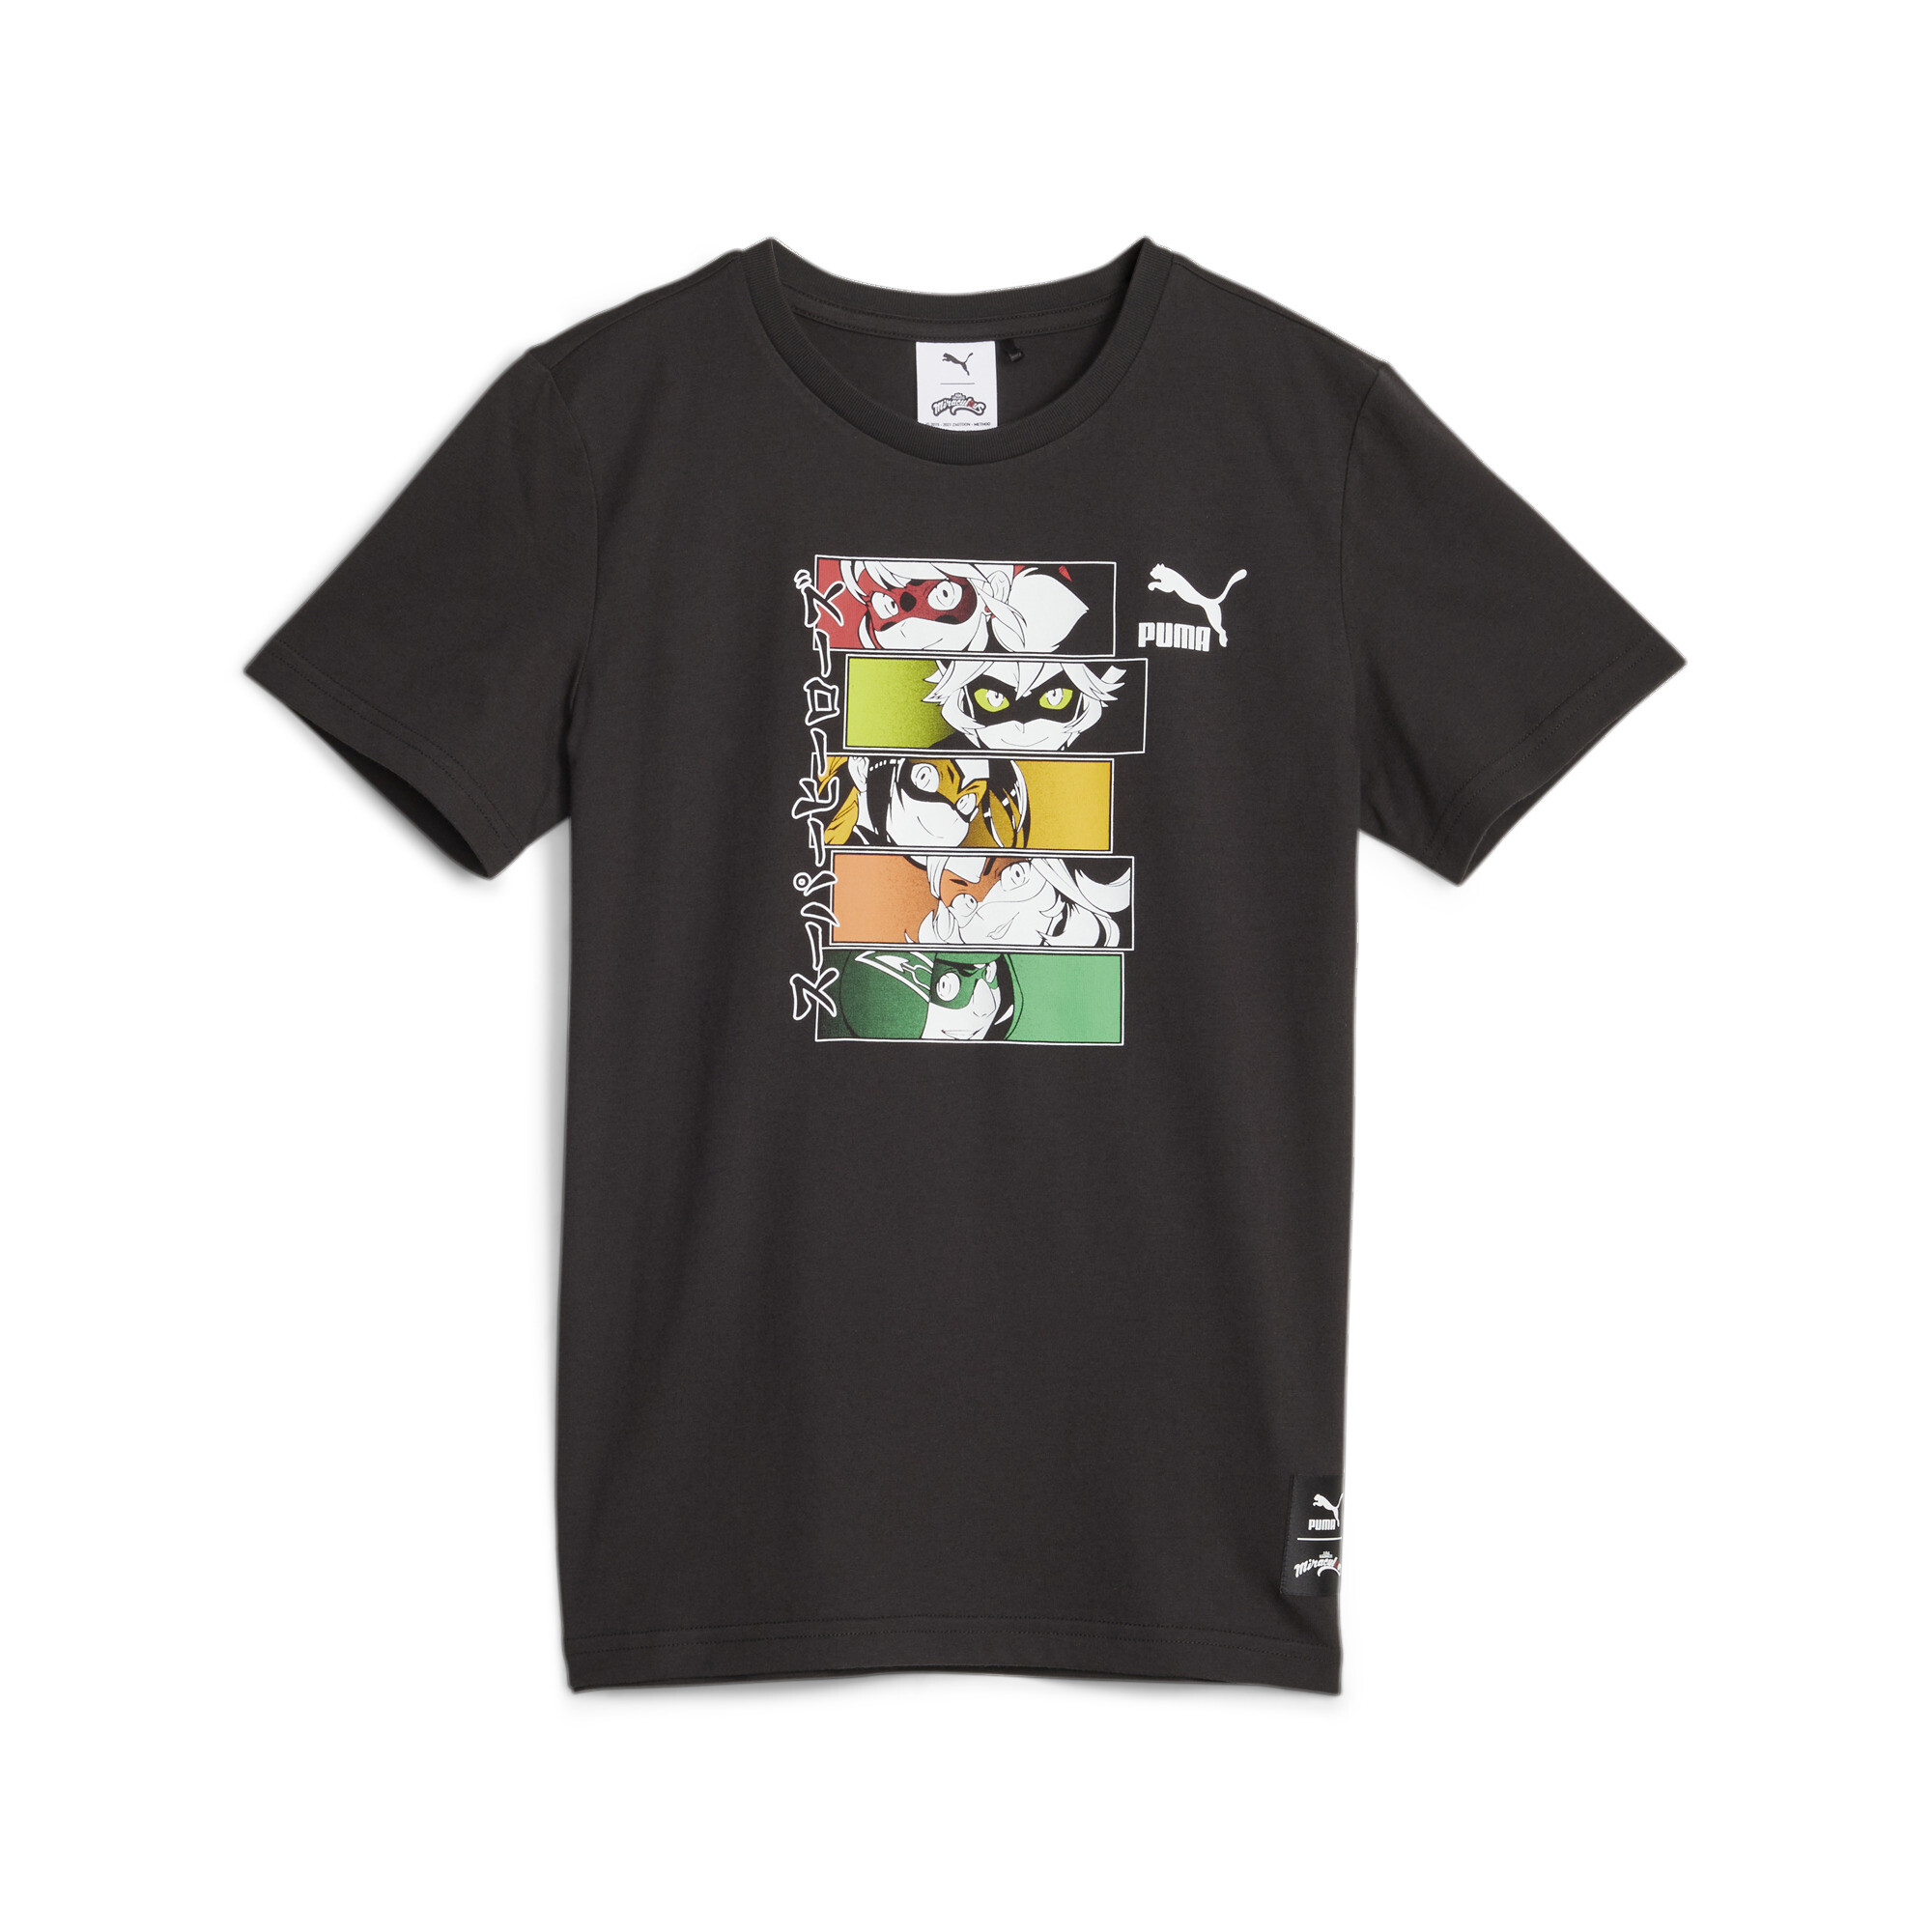 PUMA X MIRACULOUS T-Shirt In Black, Size 11-12 Youth